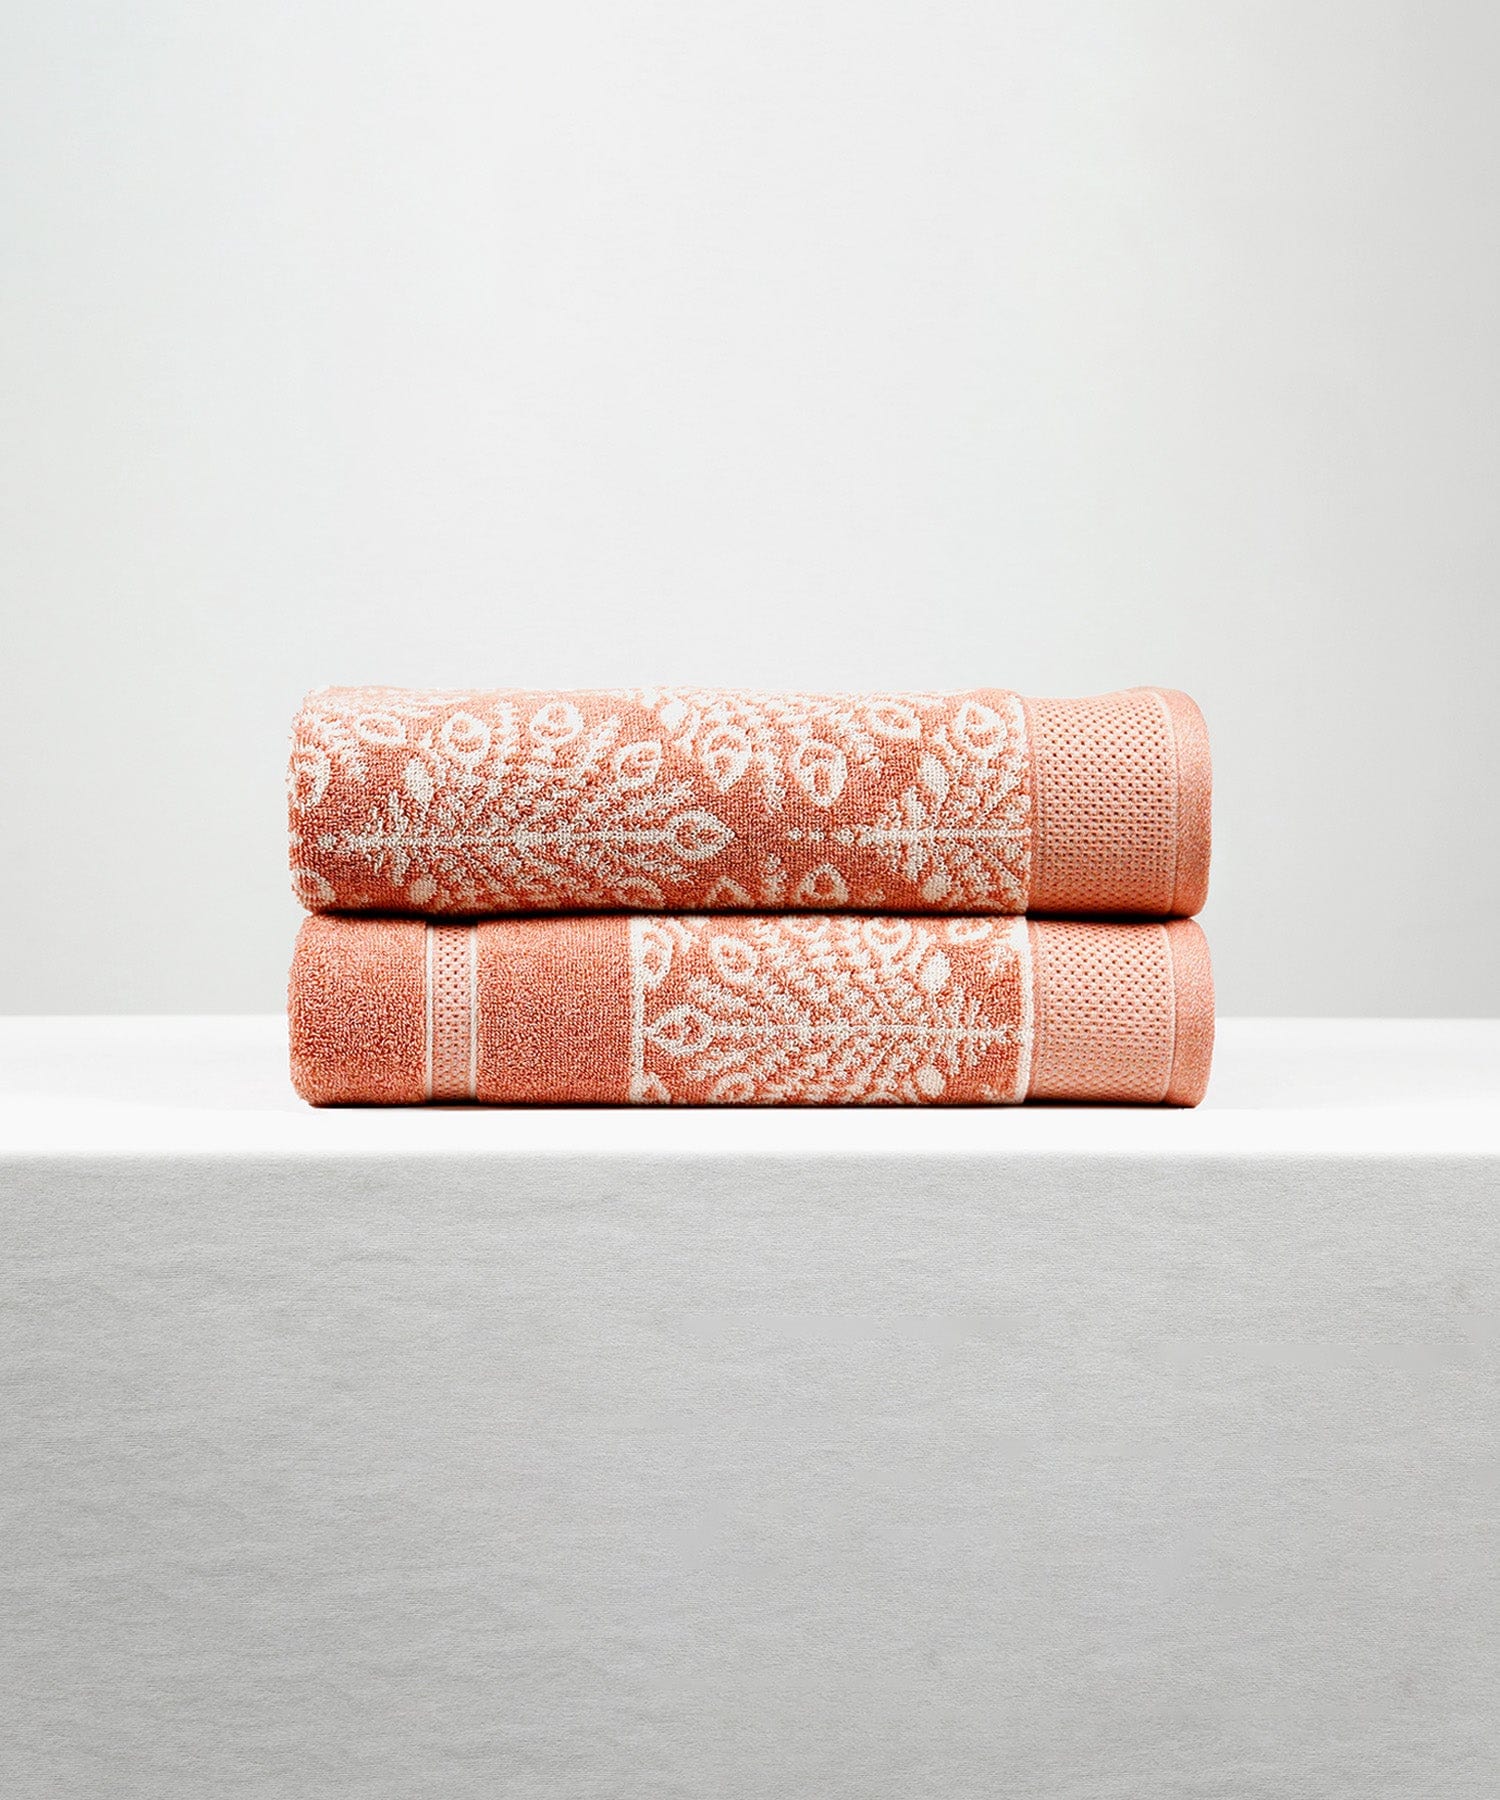 HIS & HER FASHION COLLECTION TOWEL,100% Cotton,600 GSM,Durable,Super Soft, ROSE DOWN